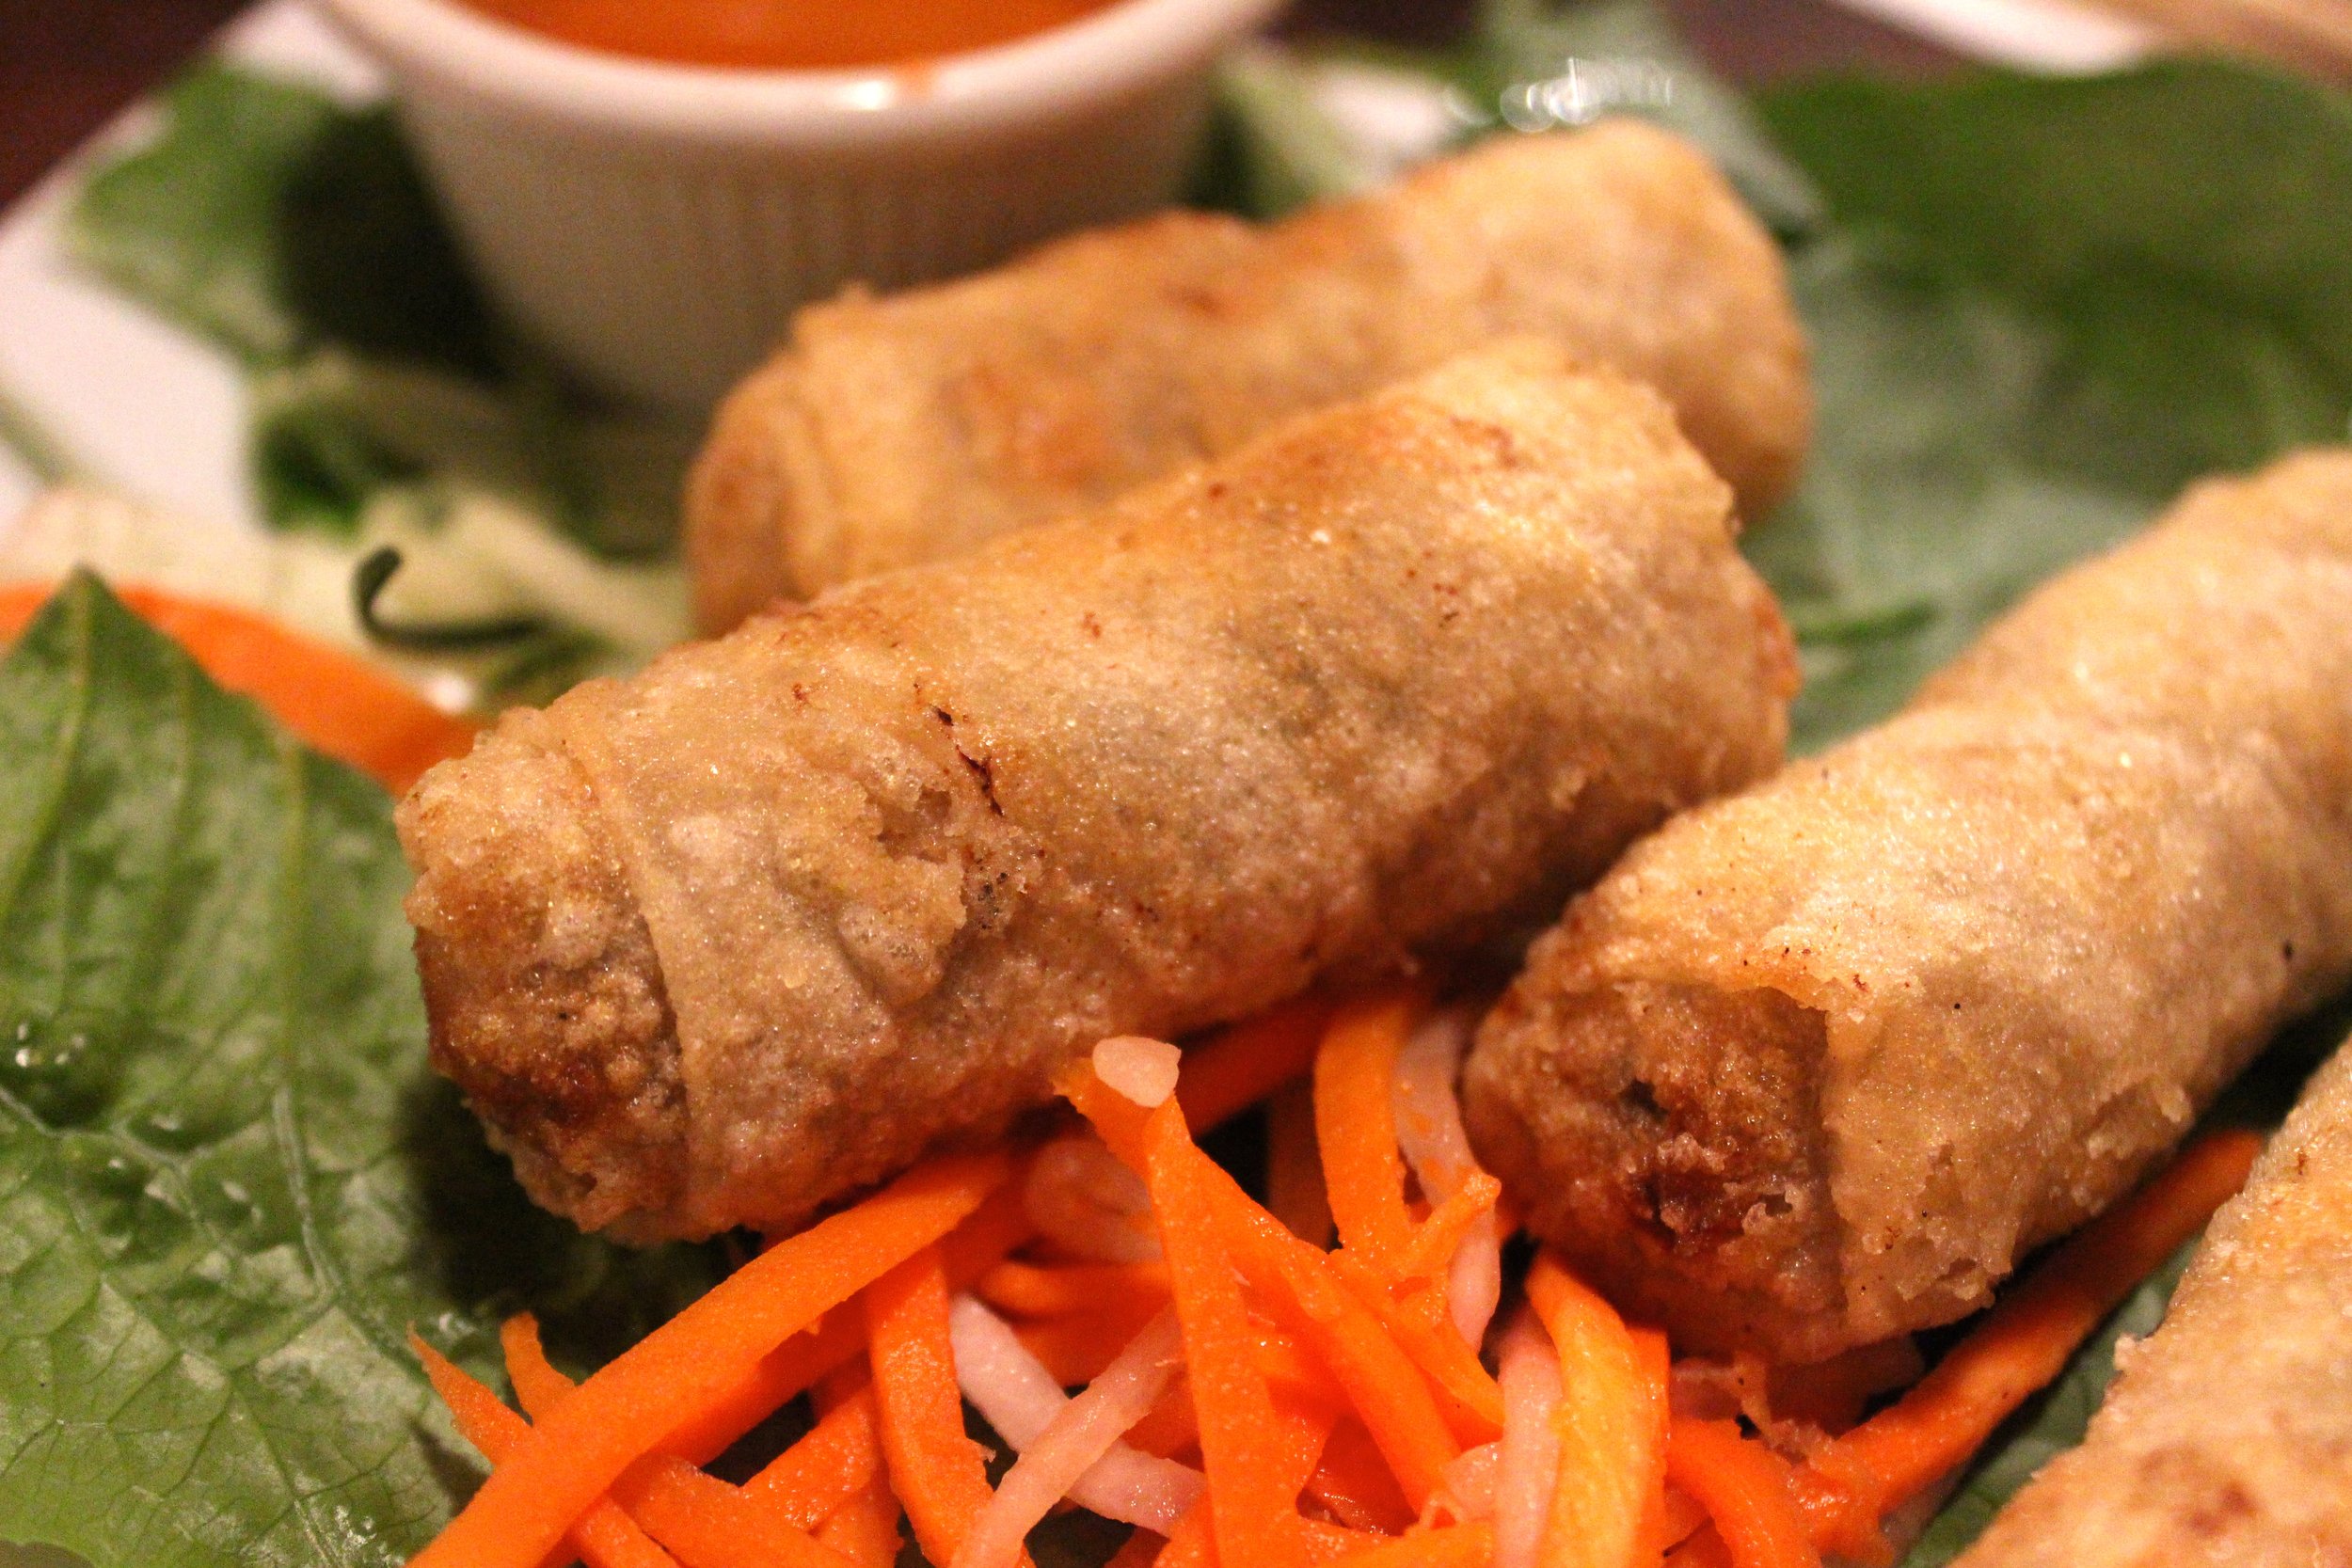 Fried Spring Rolls: Minced Pork, Shrimp, and Glass Noodles wrapped in Rice Paper 